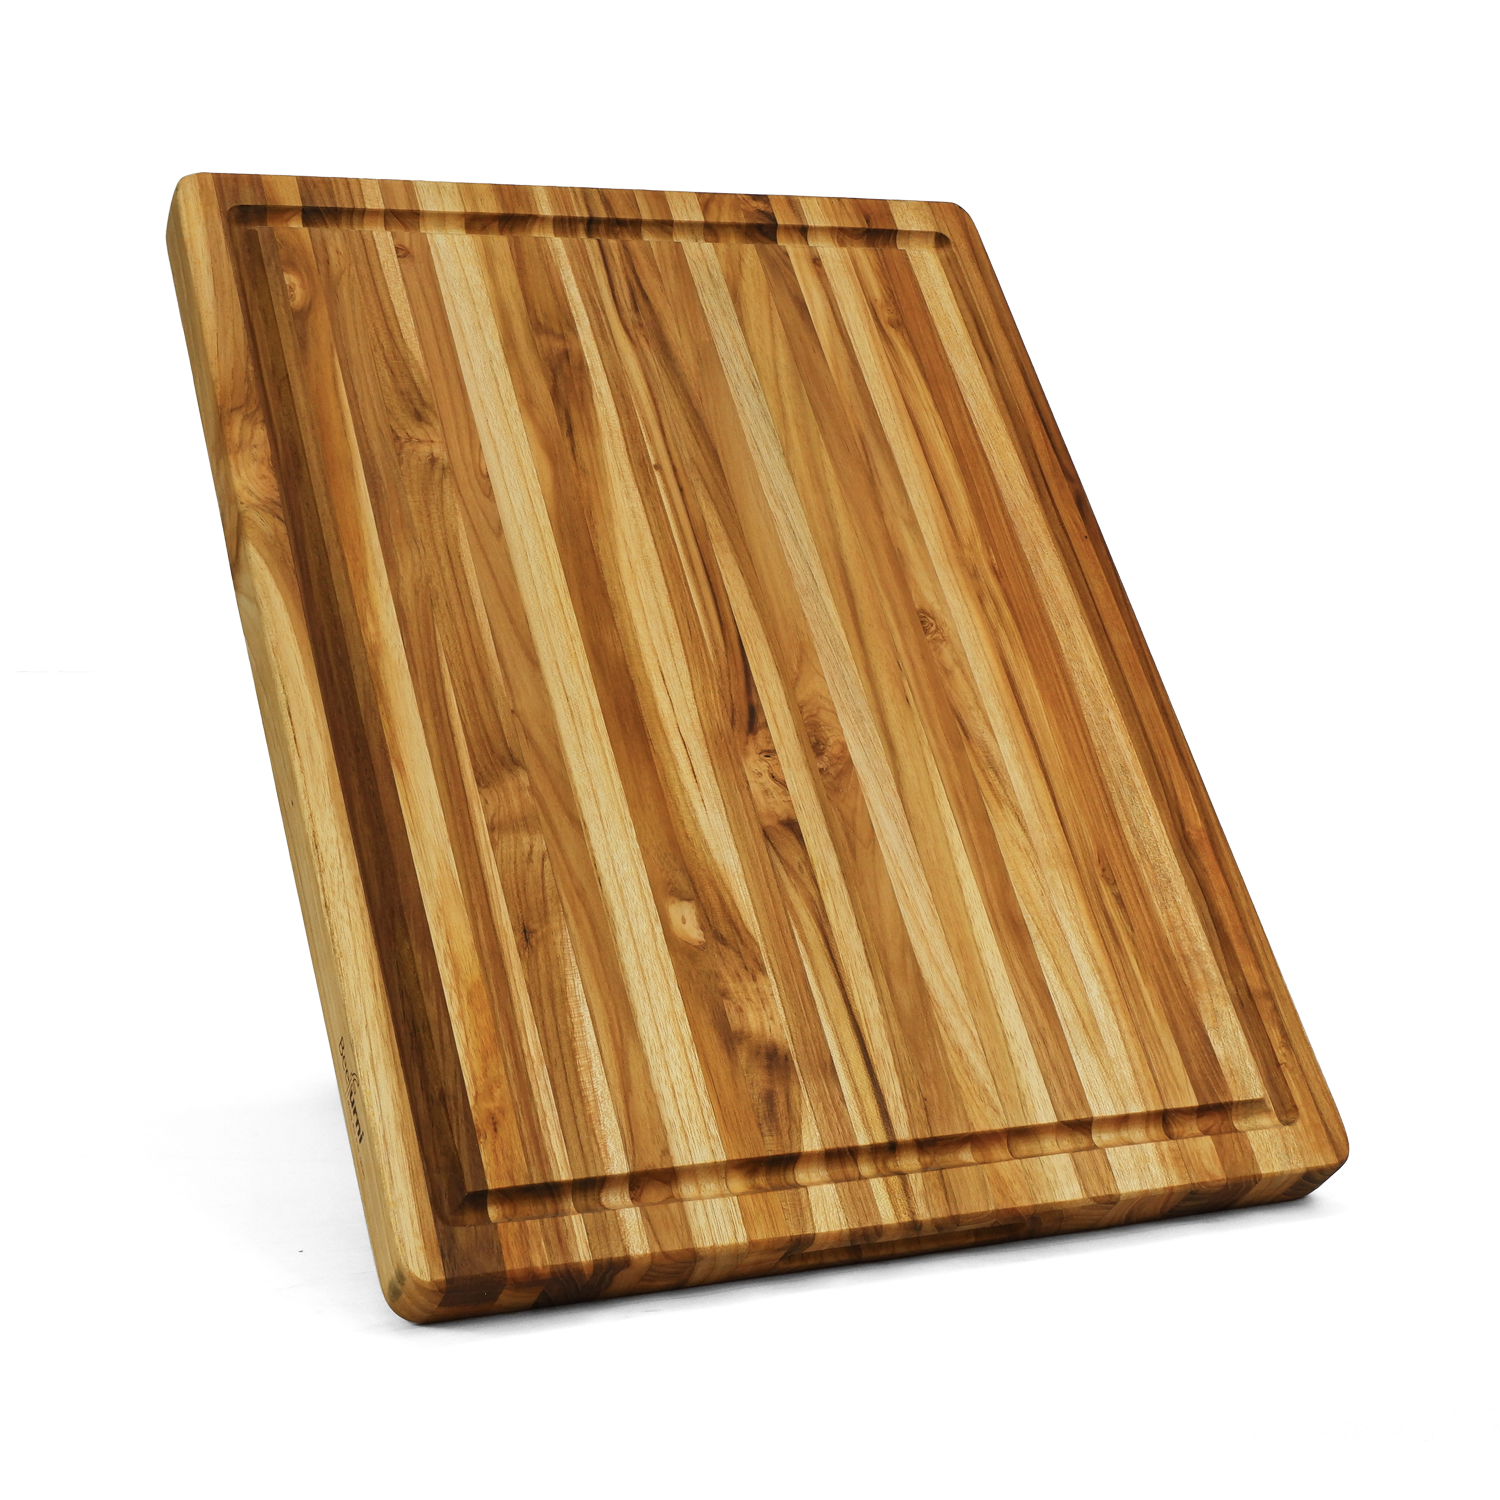 BEEFURNI Real Teak Cutting Board With Juice Groove 18 INCH, Pack of 5 Pieces-Boyel Living